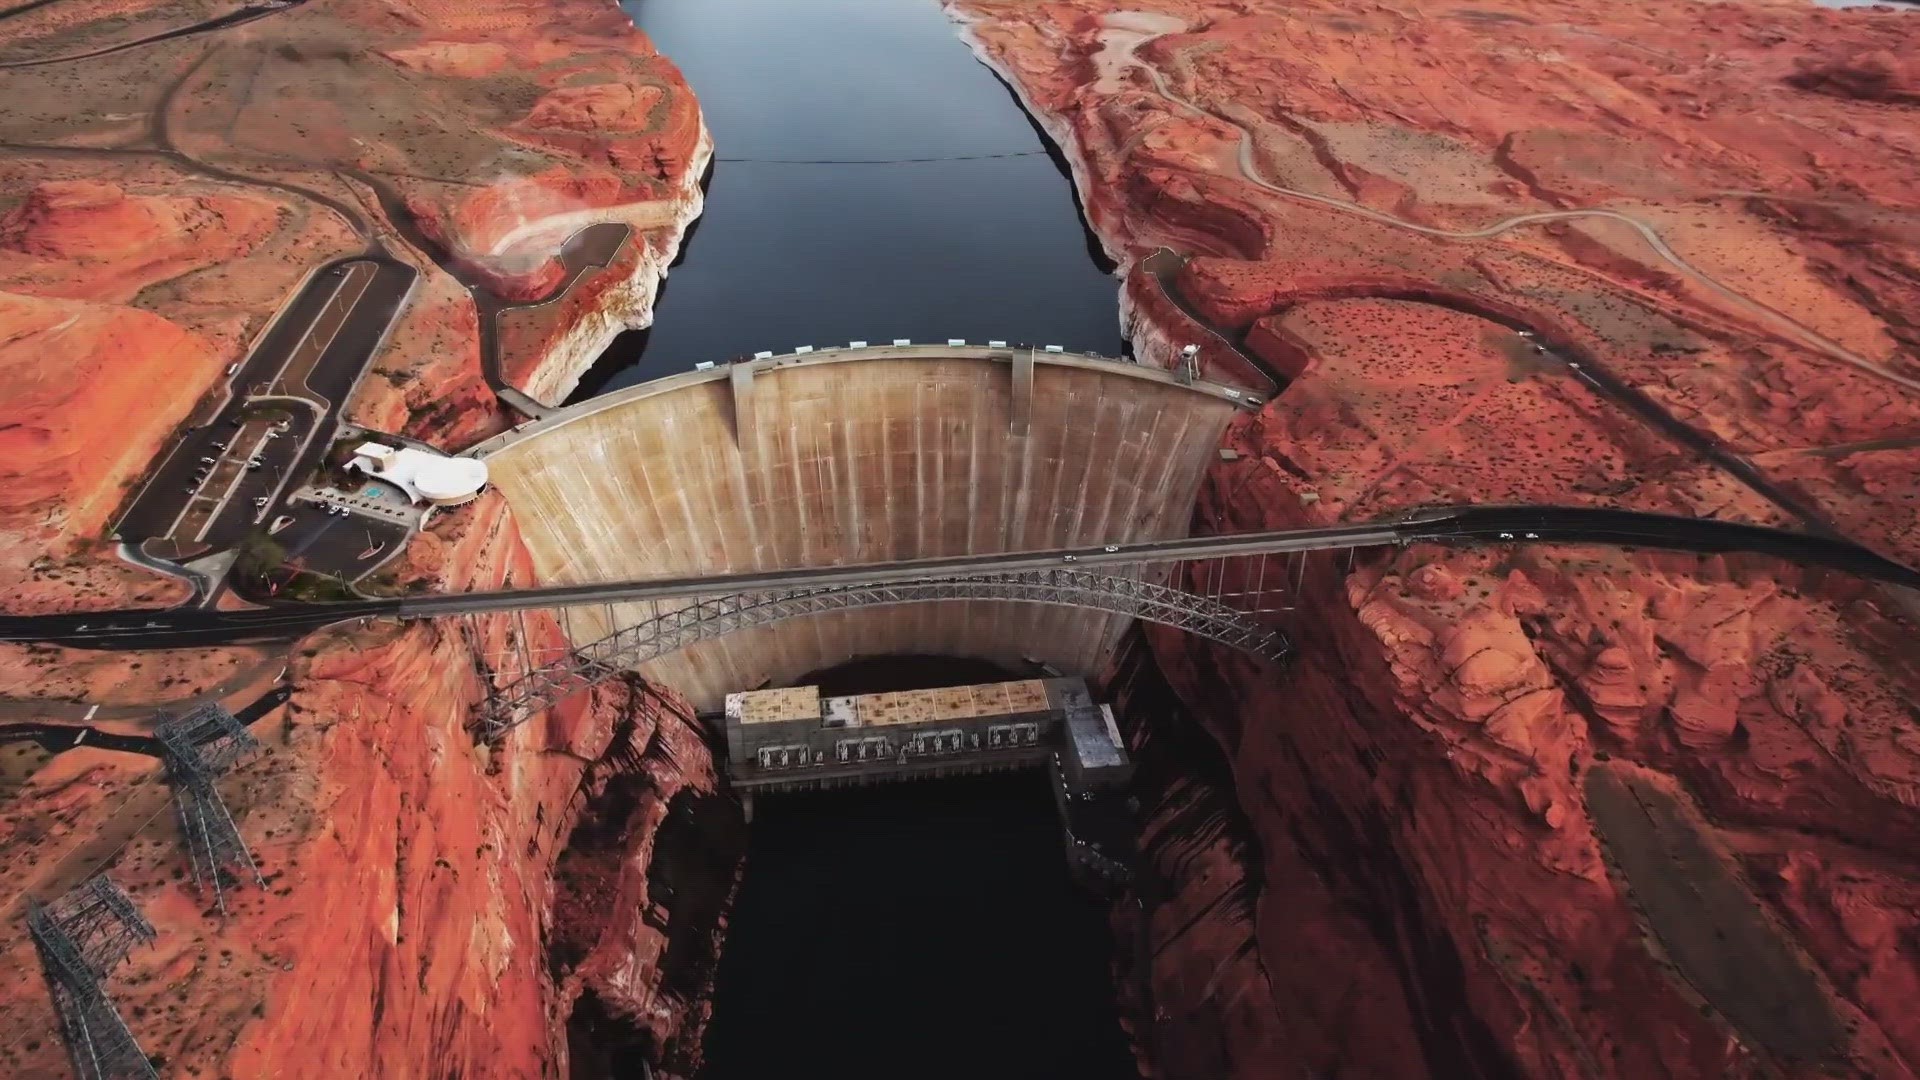 The water levels at Lake Powell have dropped so low that the turbines at the Glen Canyon dam hydroelectric plant could stop functioning.